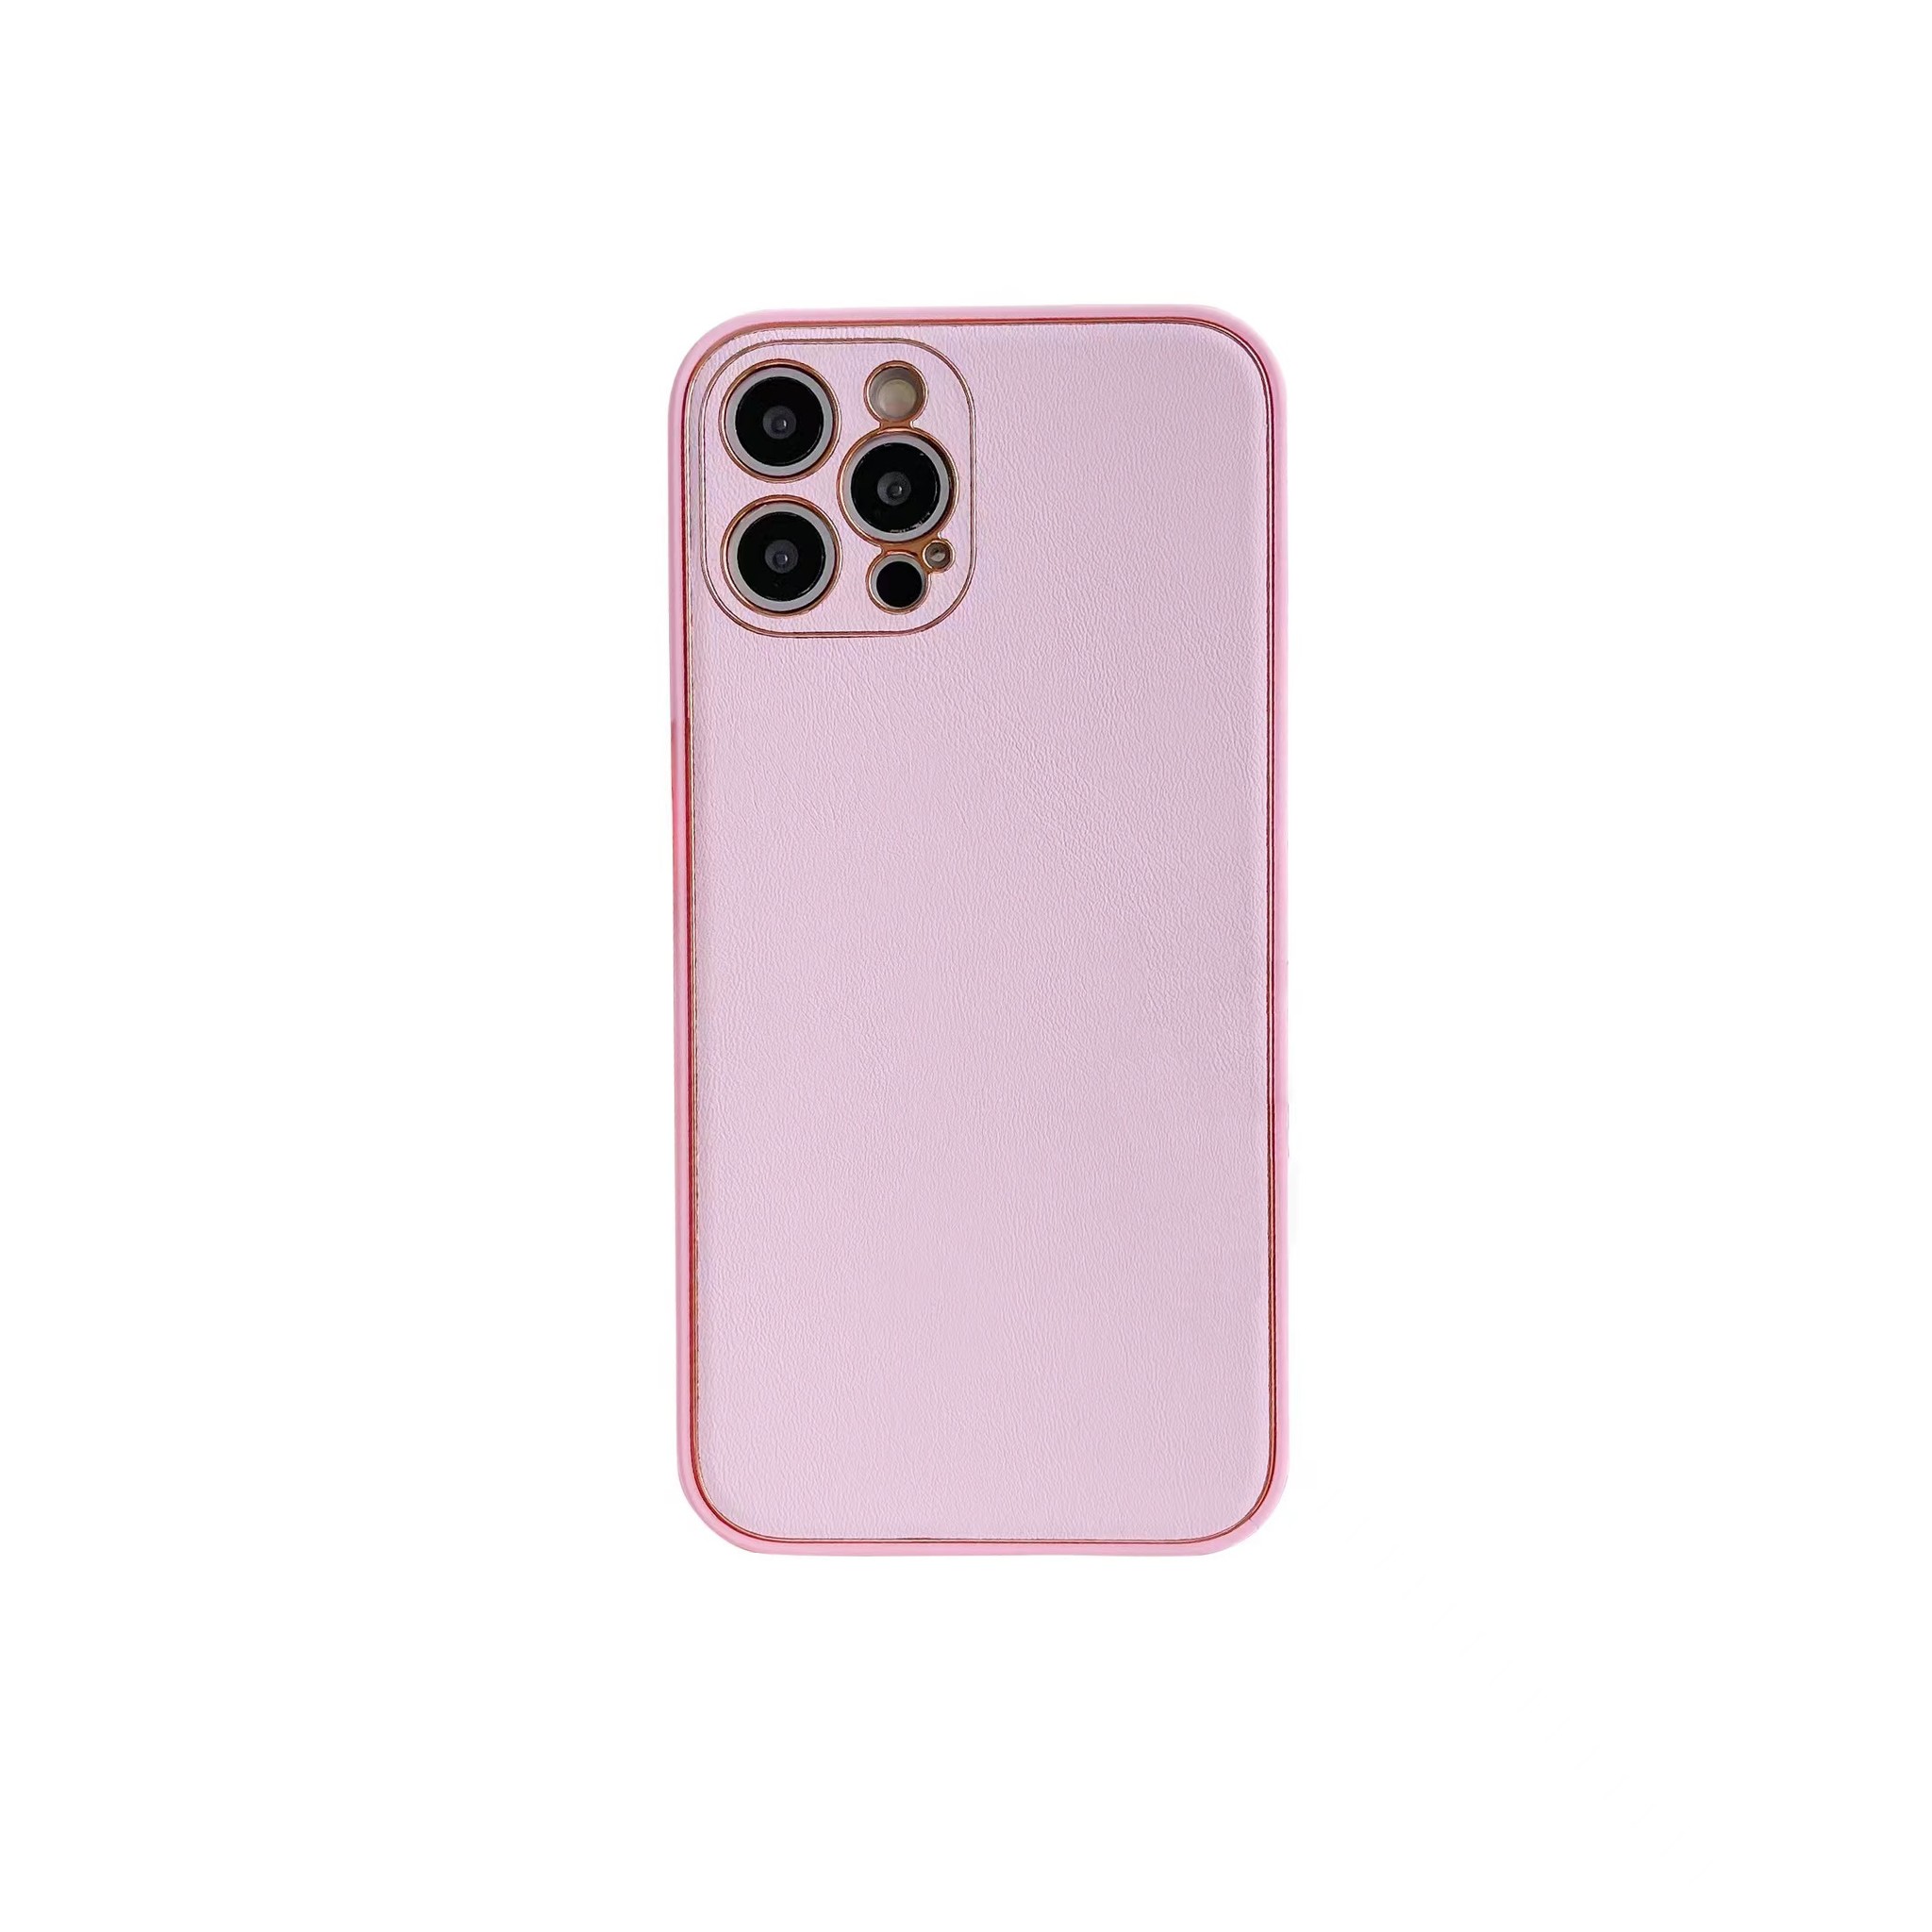 iPhone XR Back Cover Hoesje - leer - Luxe - Backcover - Apple iPhone XR - Roze/Goud